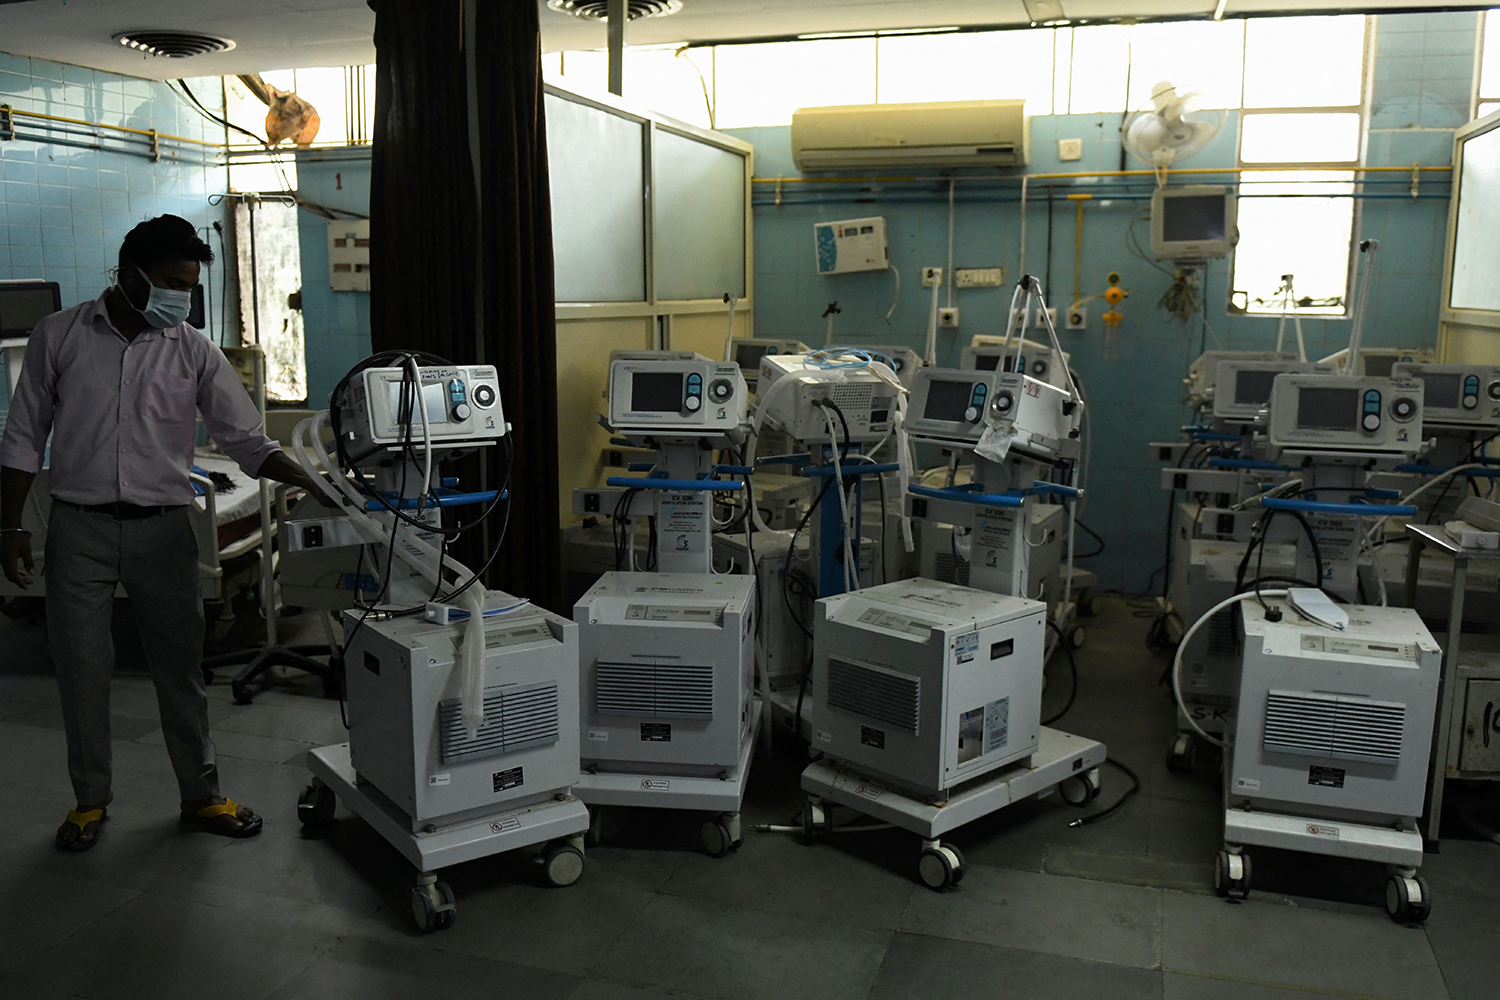 How Punjab and the centre allowed hundreds of PM-CARES ventilators to lie unused for months